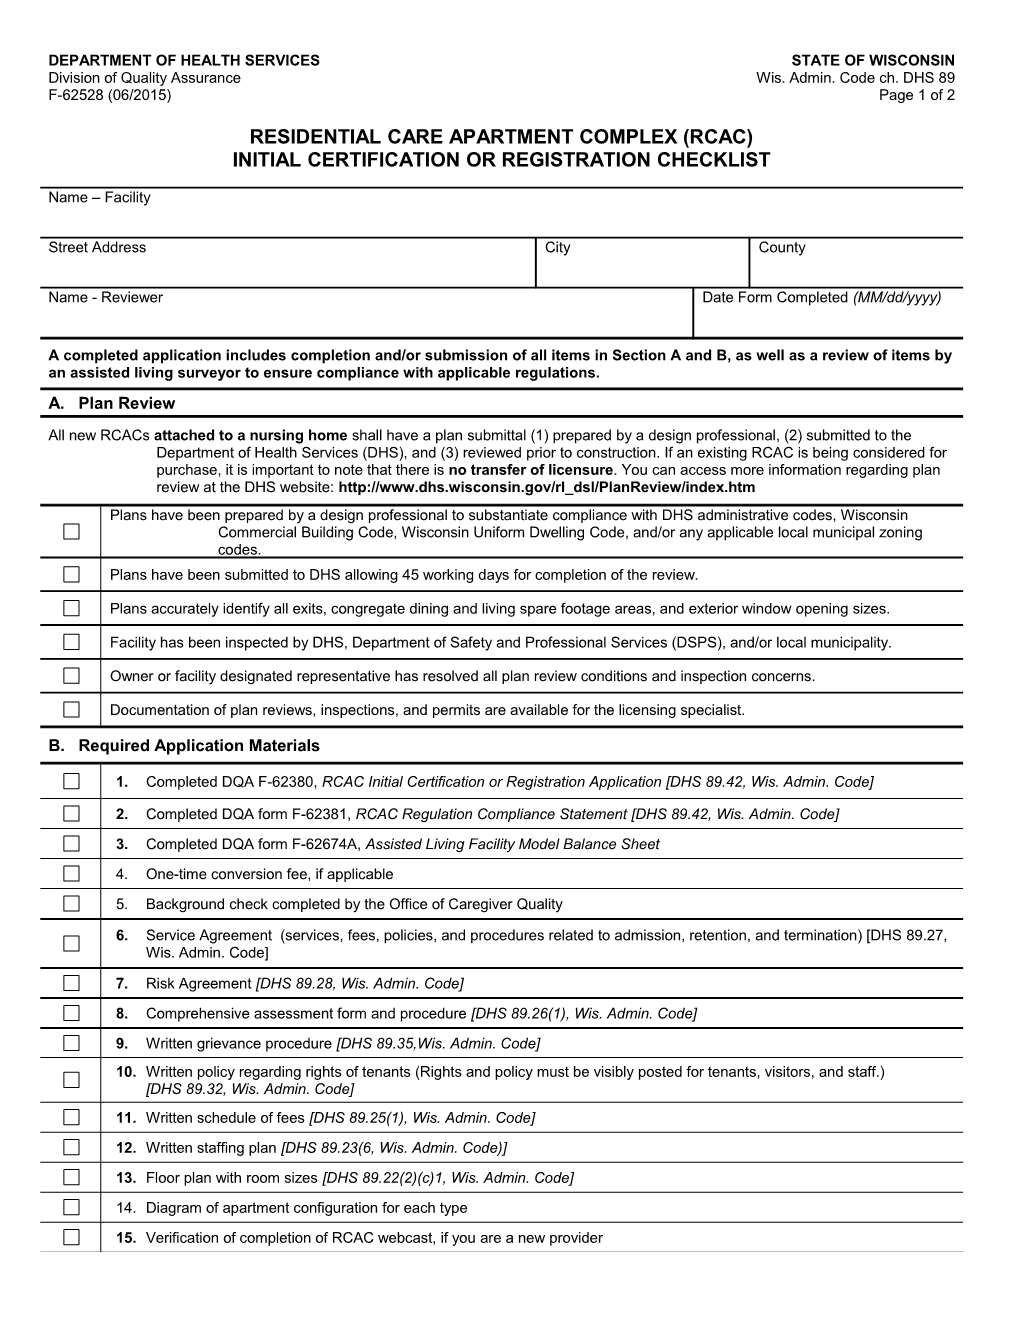 Residential Care Apartment Complex (RCAC) Initial Certification Or Registration Checklist